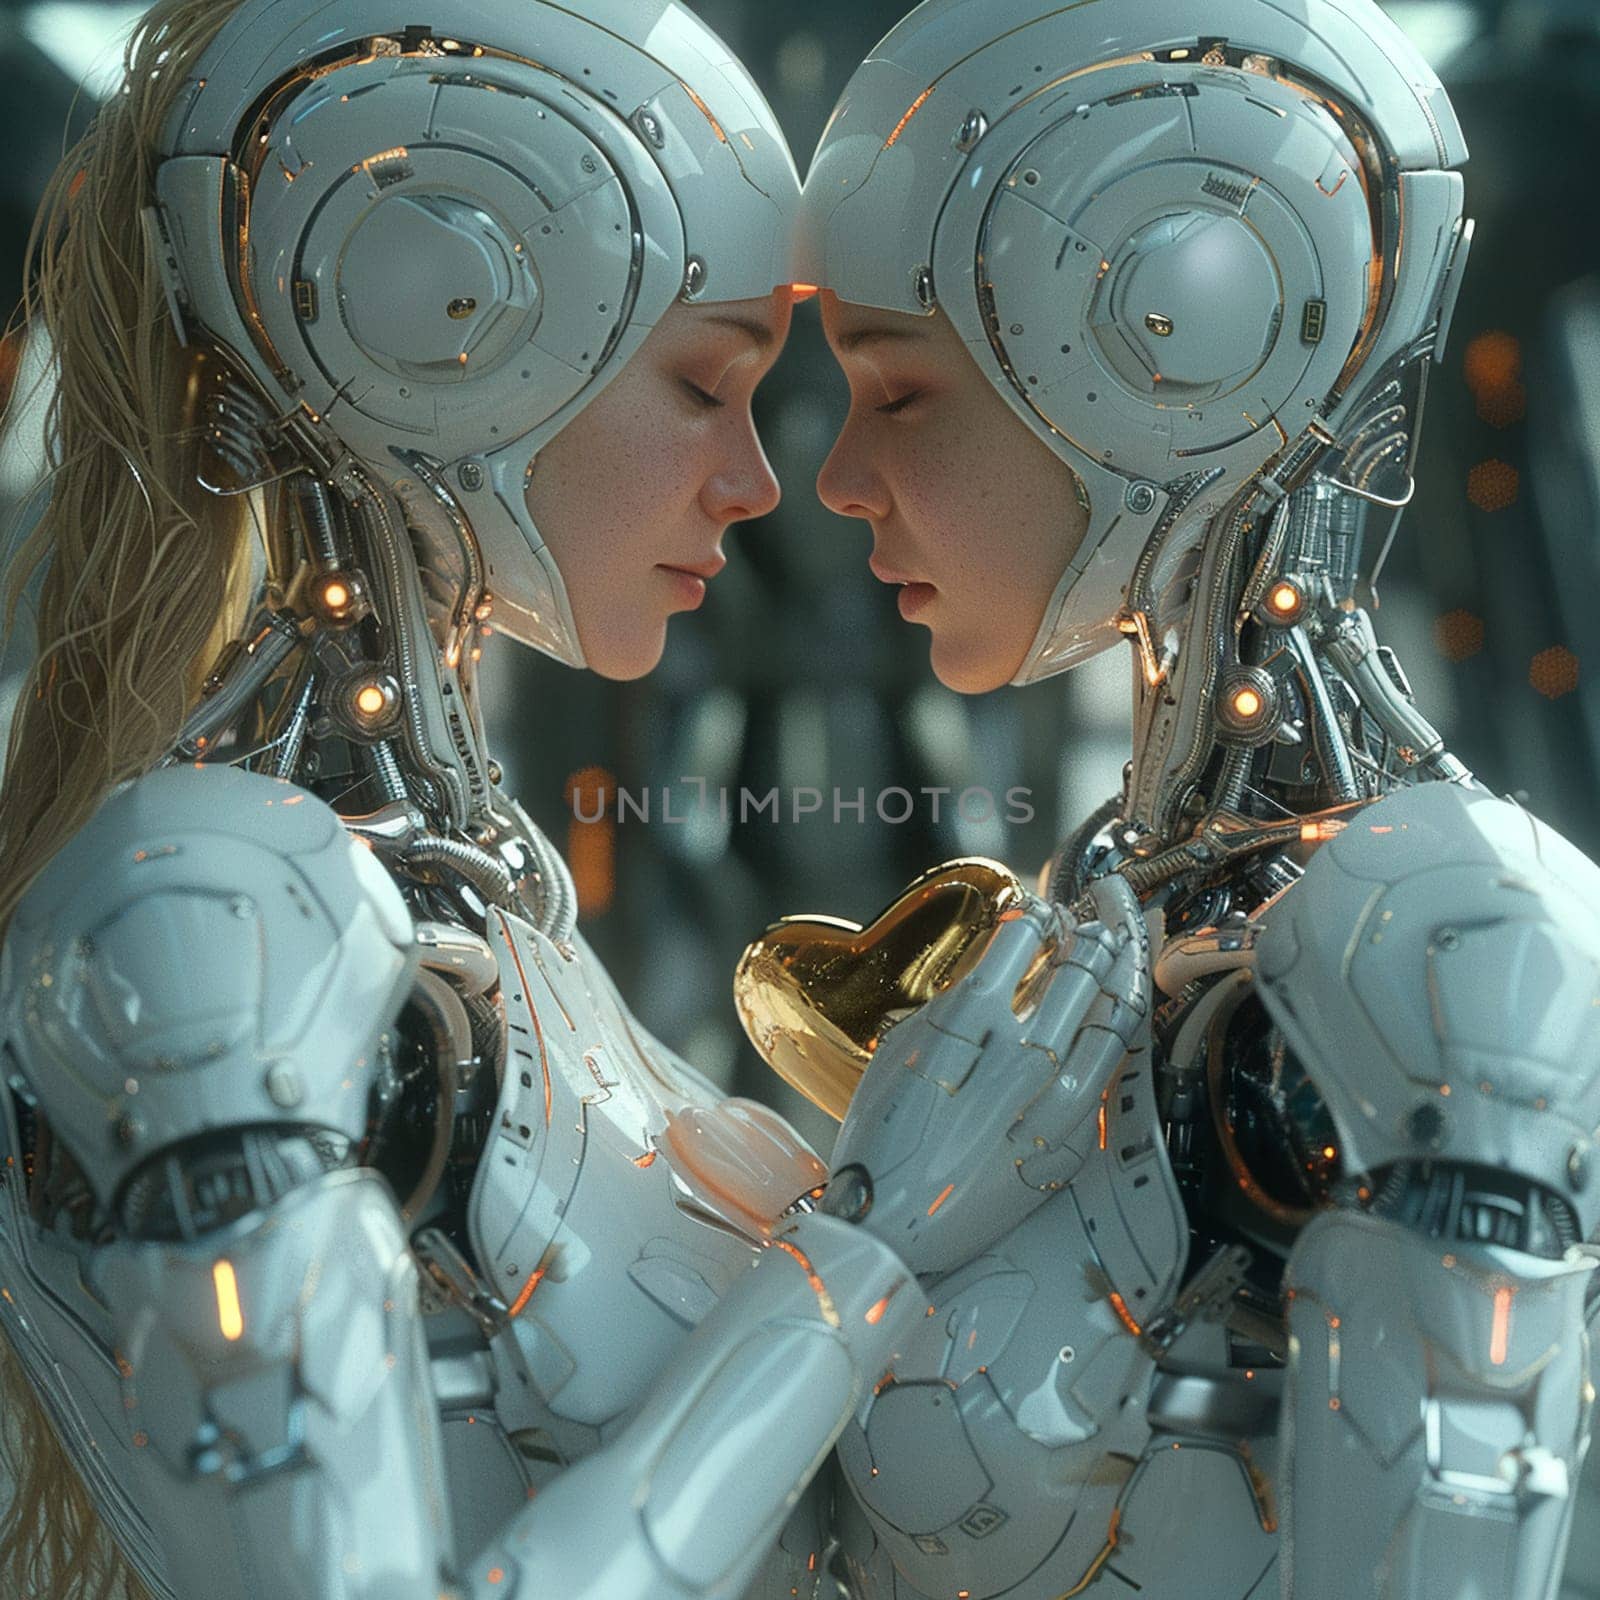 Sci-fi interpretation of White Day celebration with androids exchanging heart-shaped metallic tokens